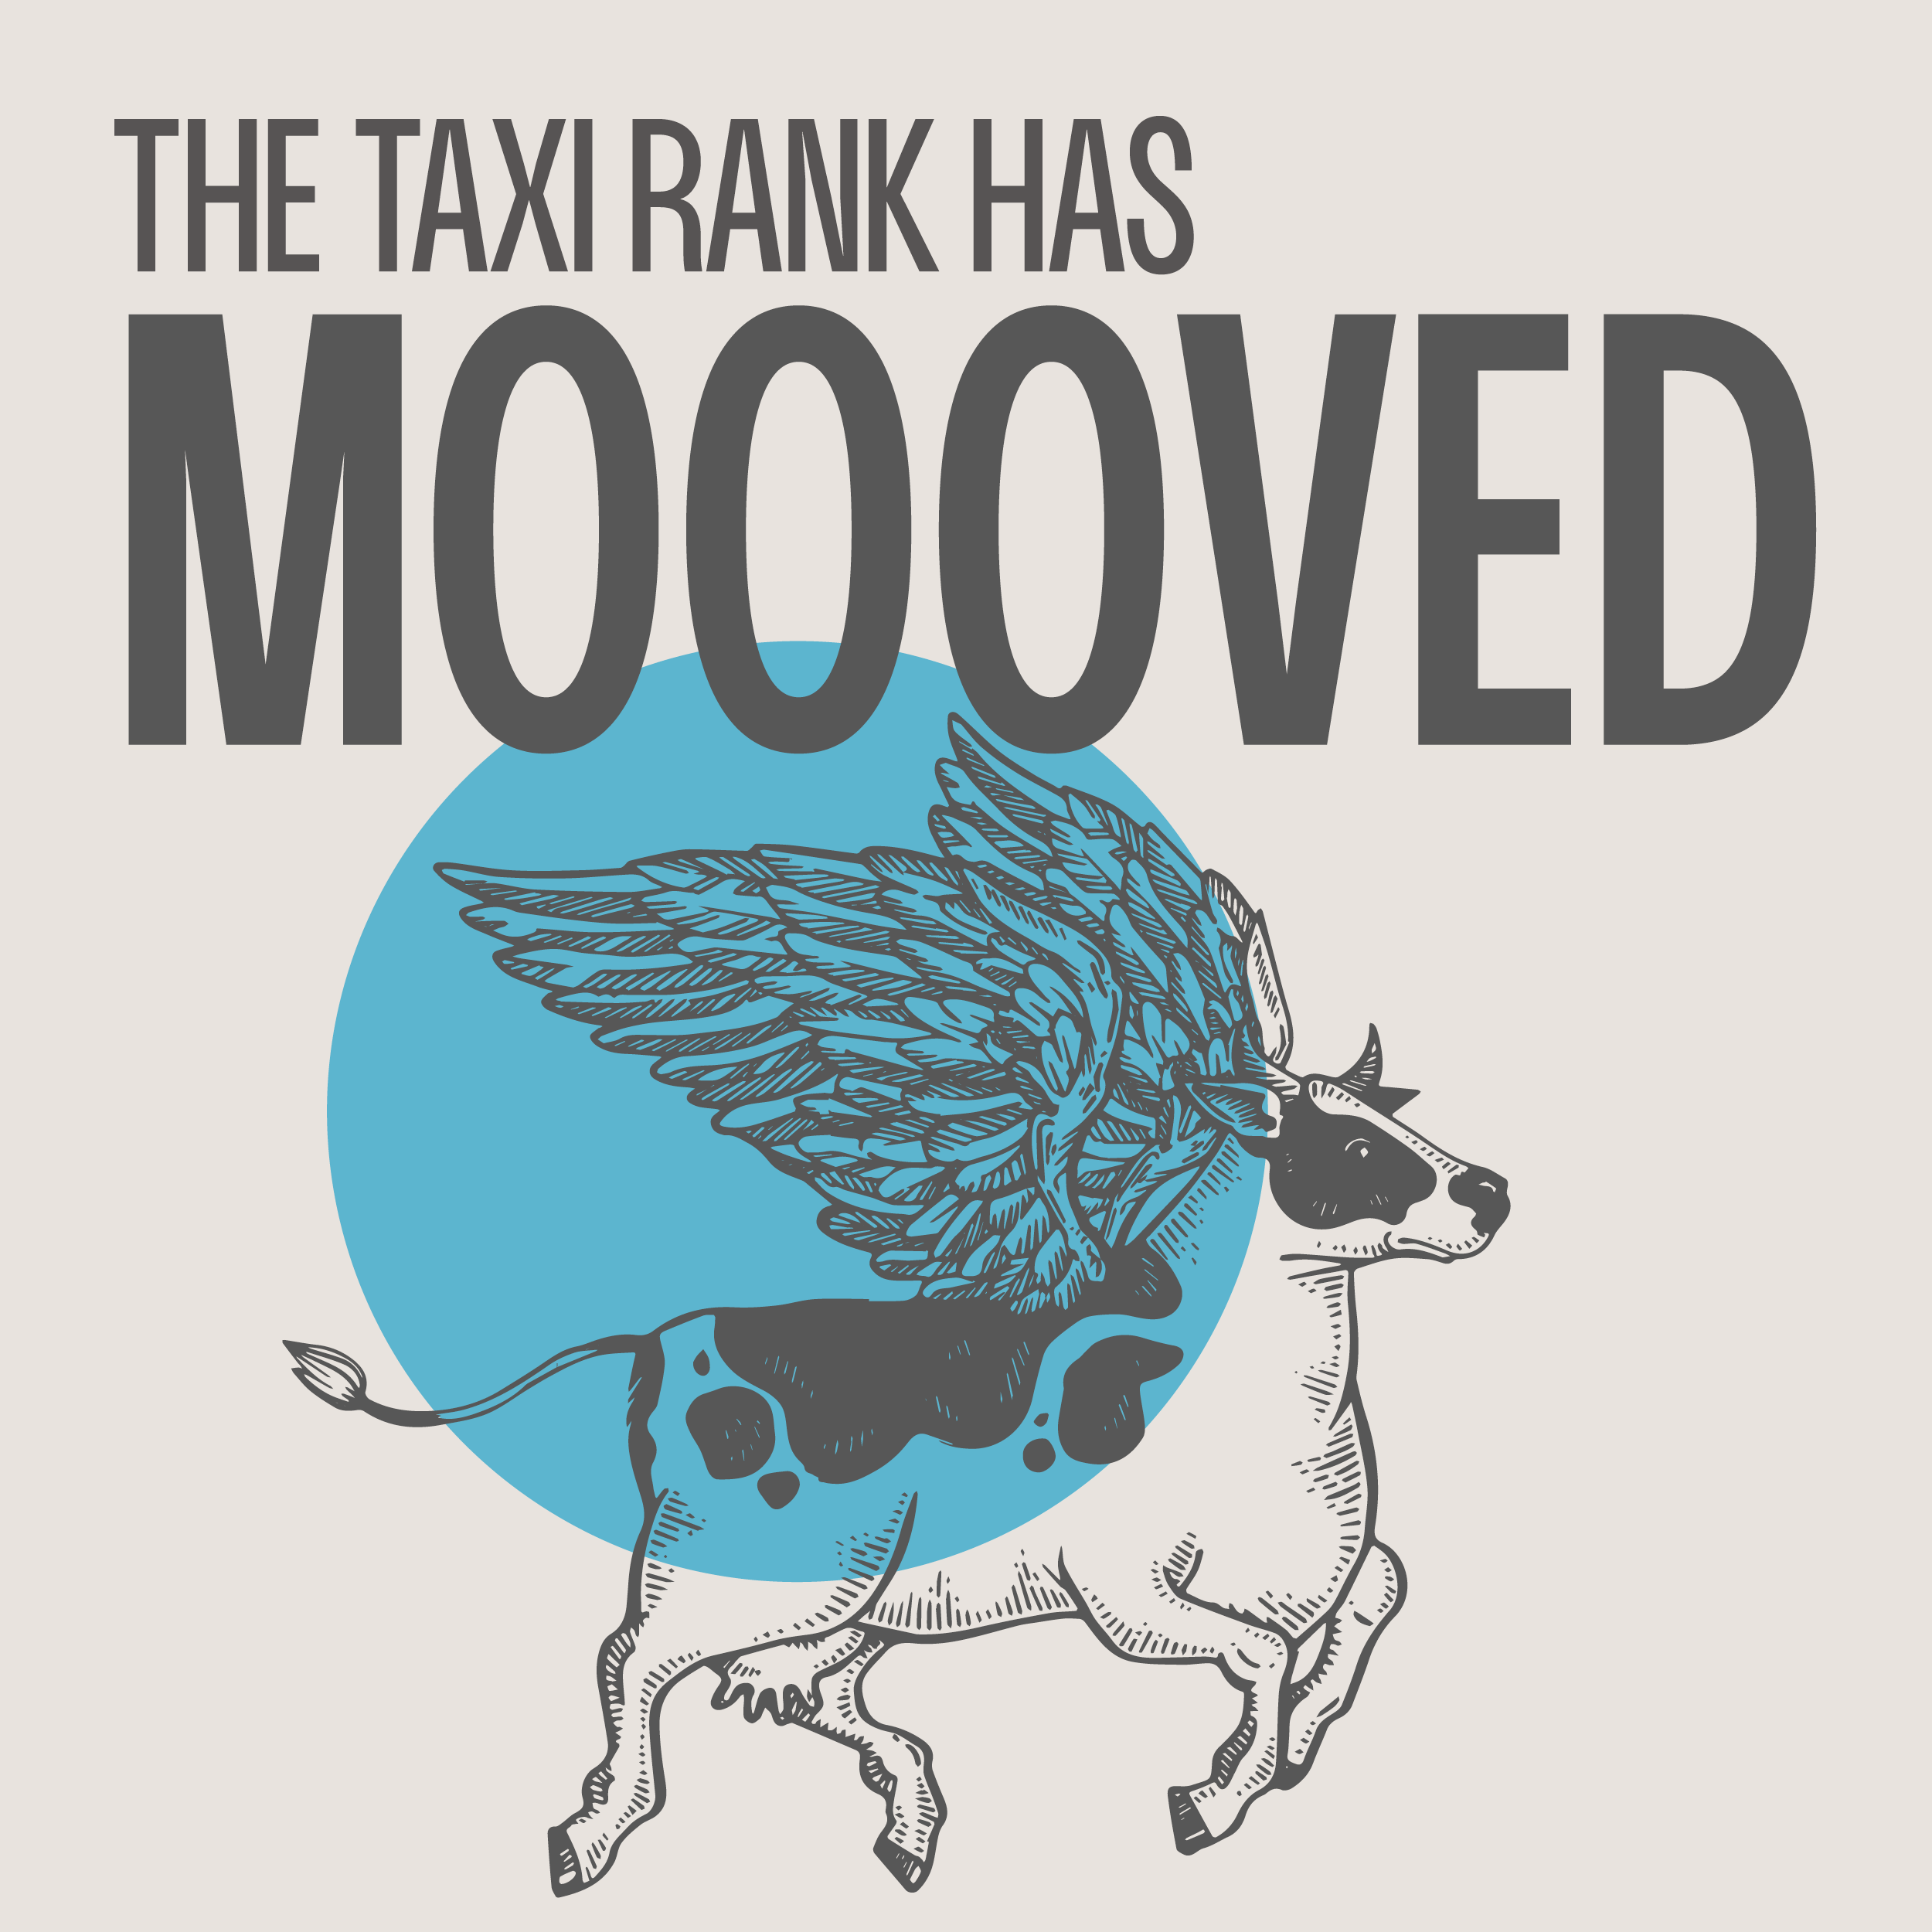 THE TAXI RANK HAS MOOOVED